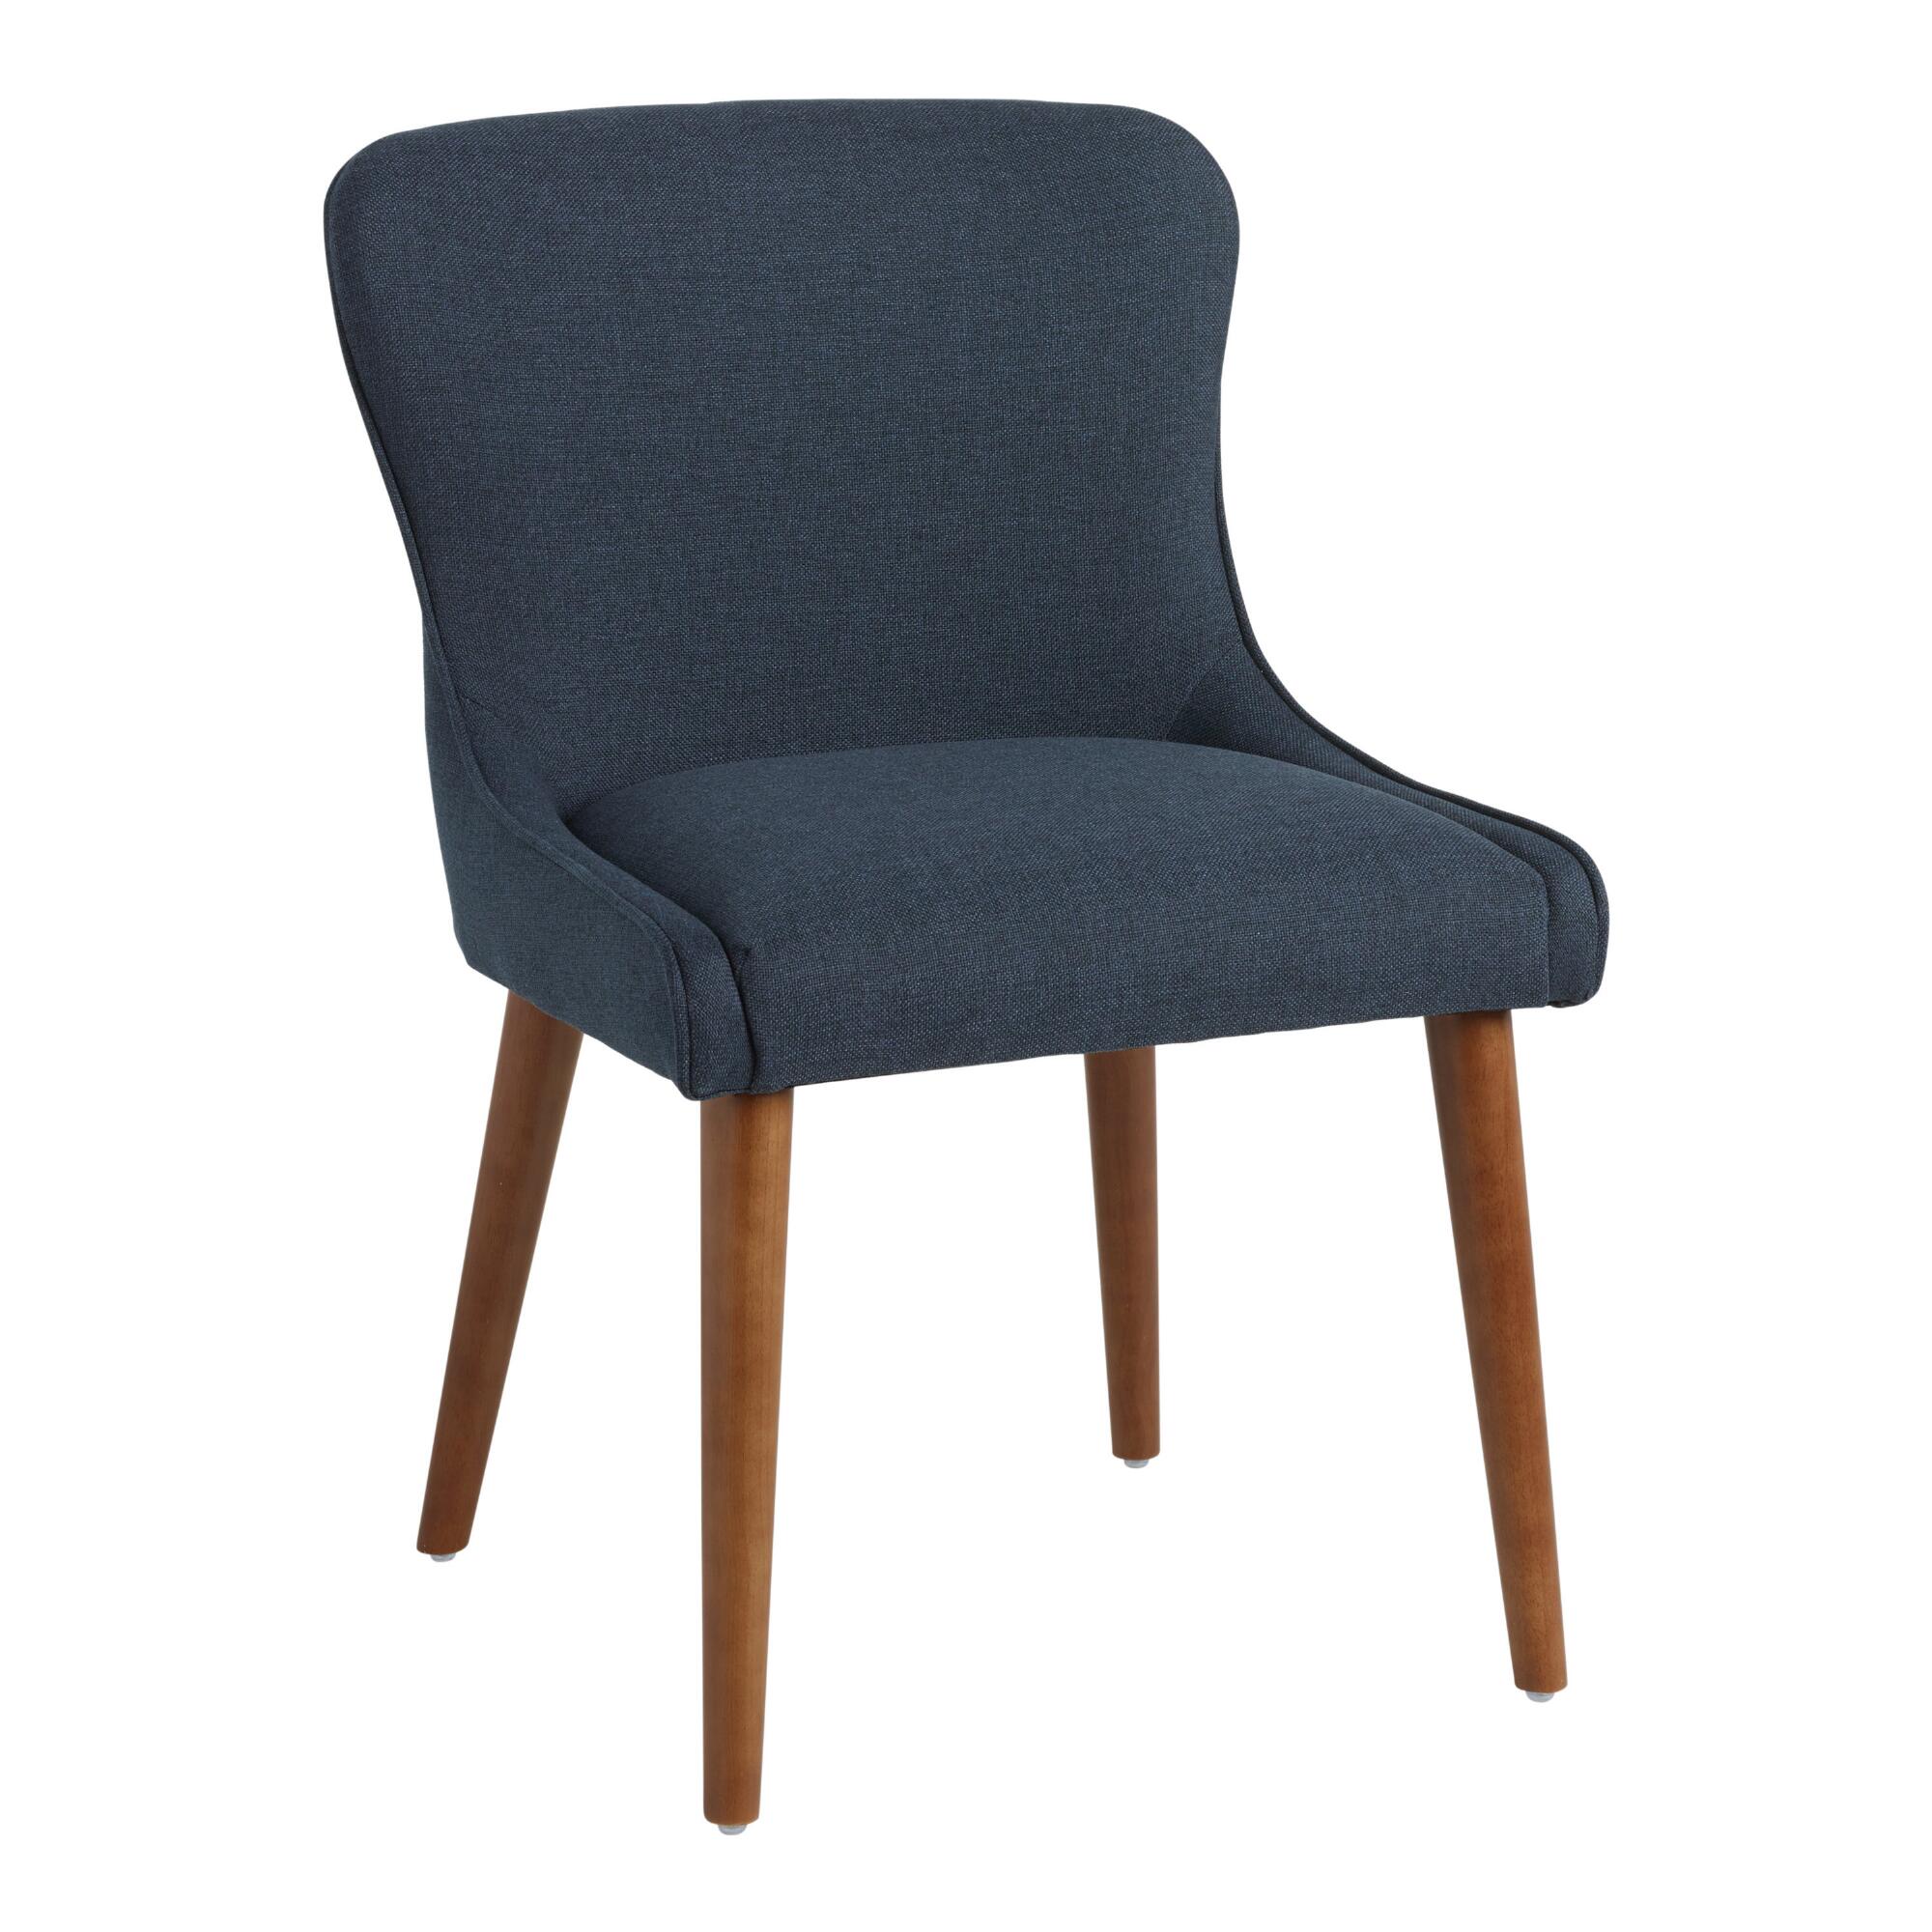 Zarah Petite Wingback Upholstered Dining Chairs Set Of 2: Blue - Fabric by World Market